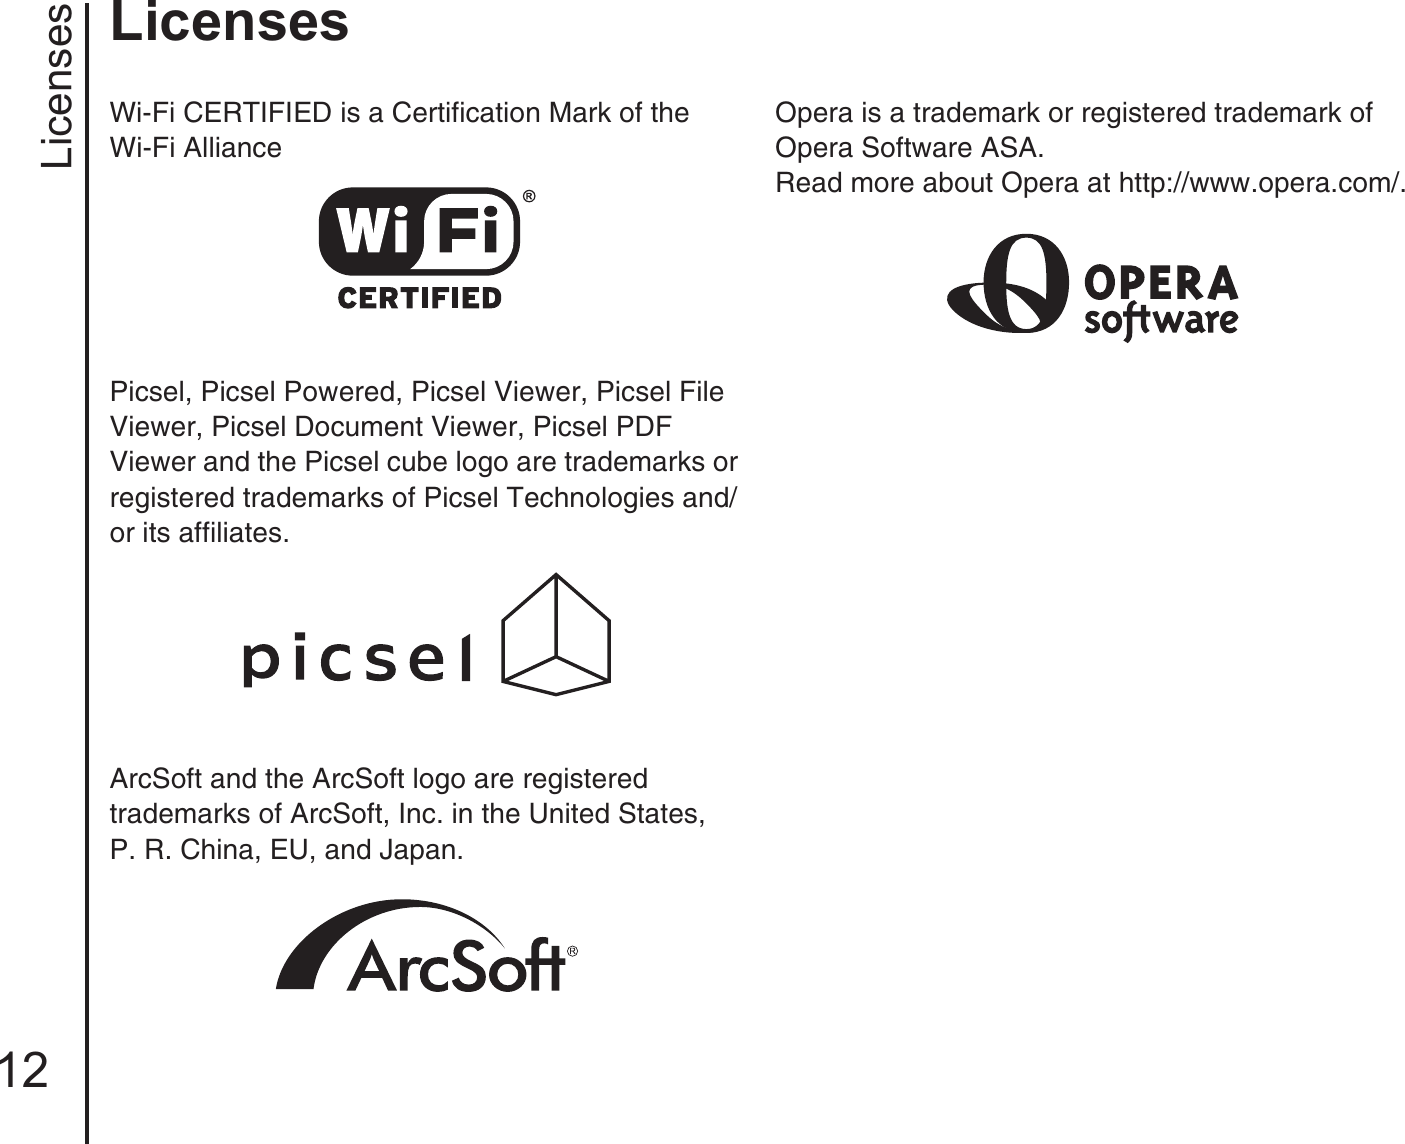 Licenses12LicensesWi-Fi CERTIFIED is a Certification Mark of the Wi-Fi AlliancePicsel, Picsel Powered, Picsel Viewer, Picsel File Viewer, Picsel Document Viewer, Picsel PDF Viewer and the Picsel cube logo are trademarks or registered trademarks of Picsel Technologies and/or its affiliates.ArcSoft and the ArcSoft logo are registered trademarks of ArcSoft, Inc. in the United States,P. R. China, EU, and Japan.Opera is a trademark or registered trademark of Opera Software ASA.Read more about Opera at http://www.opera.com/.